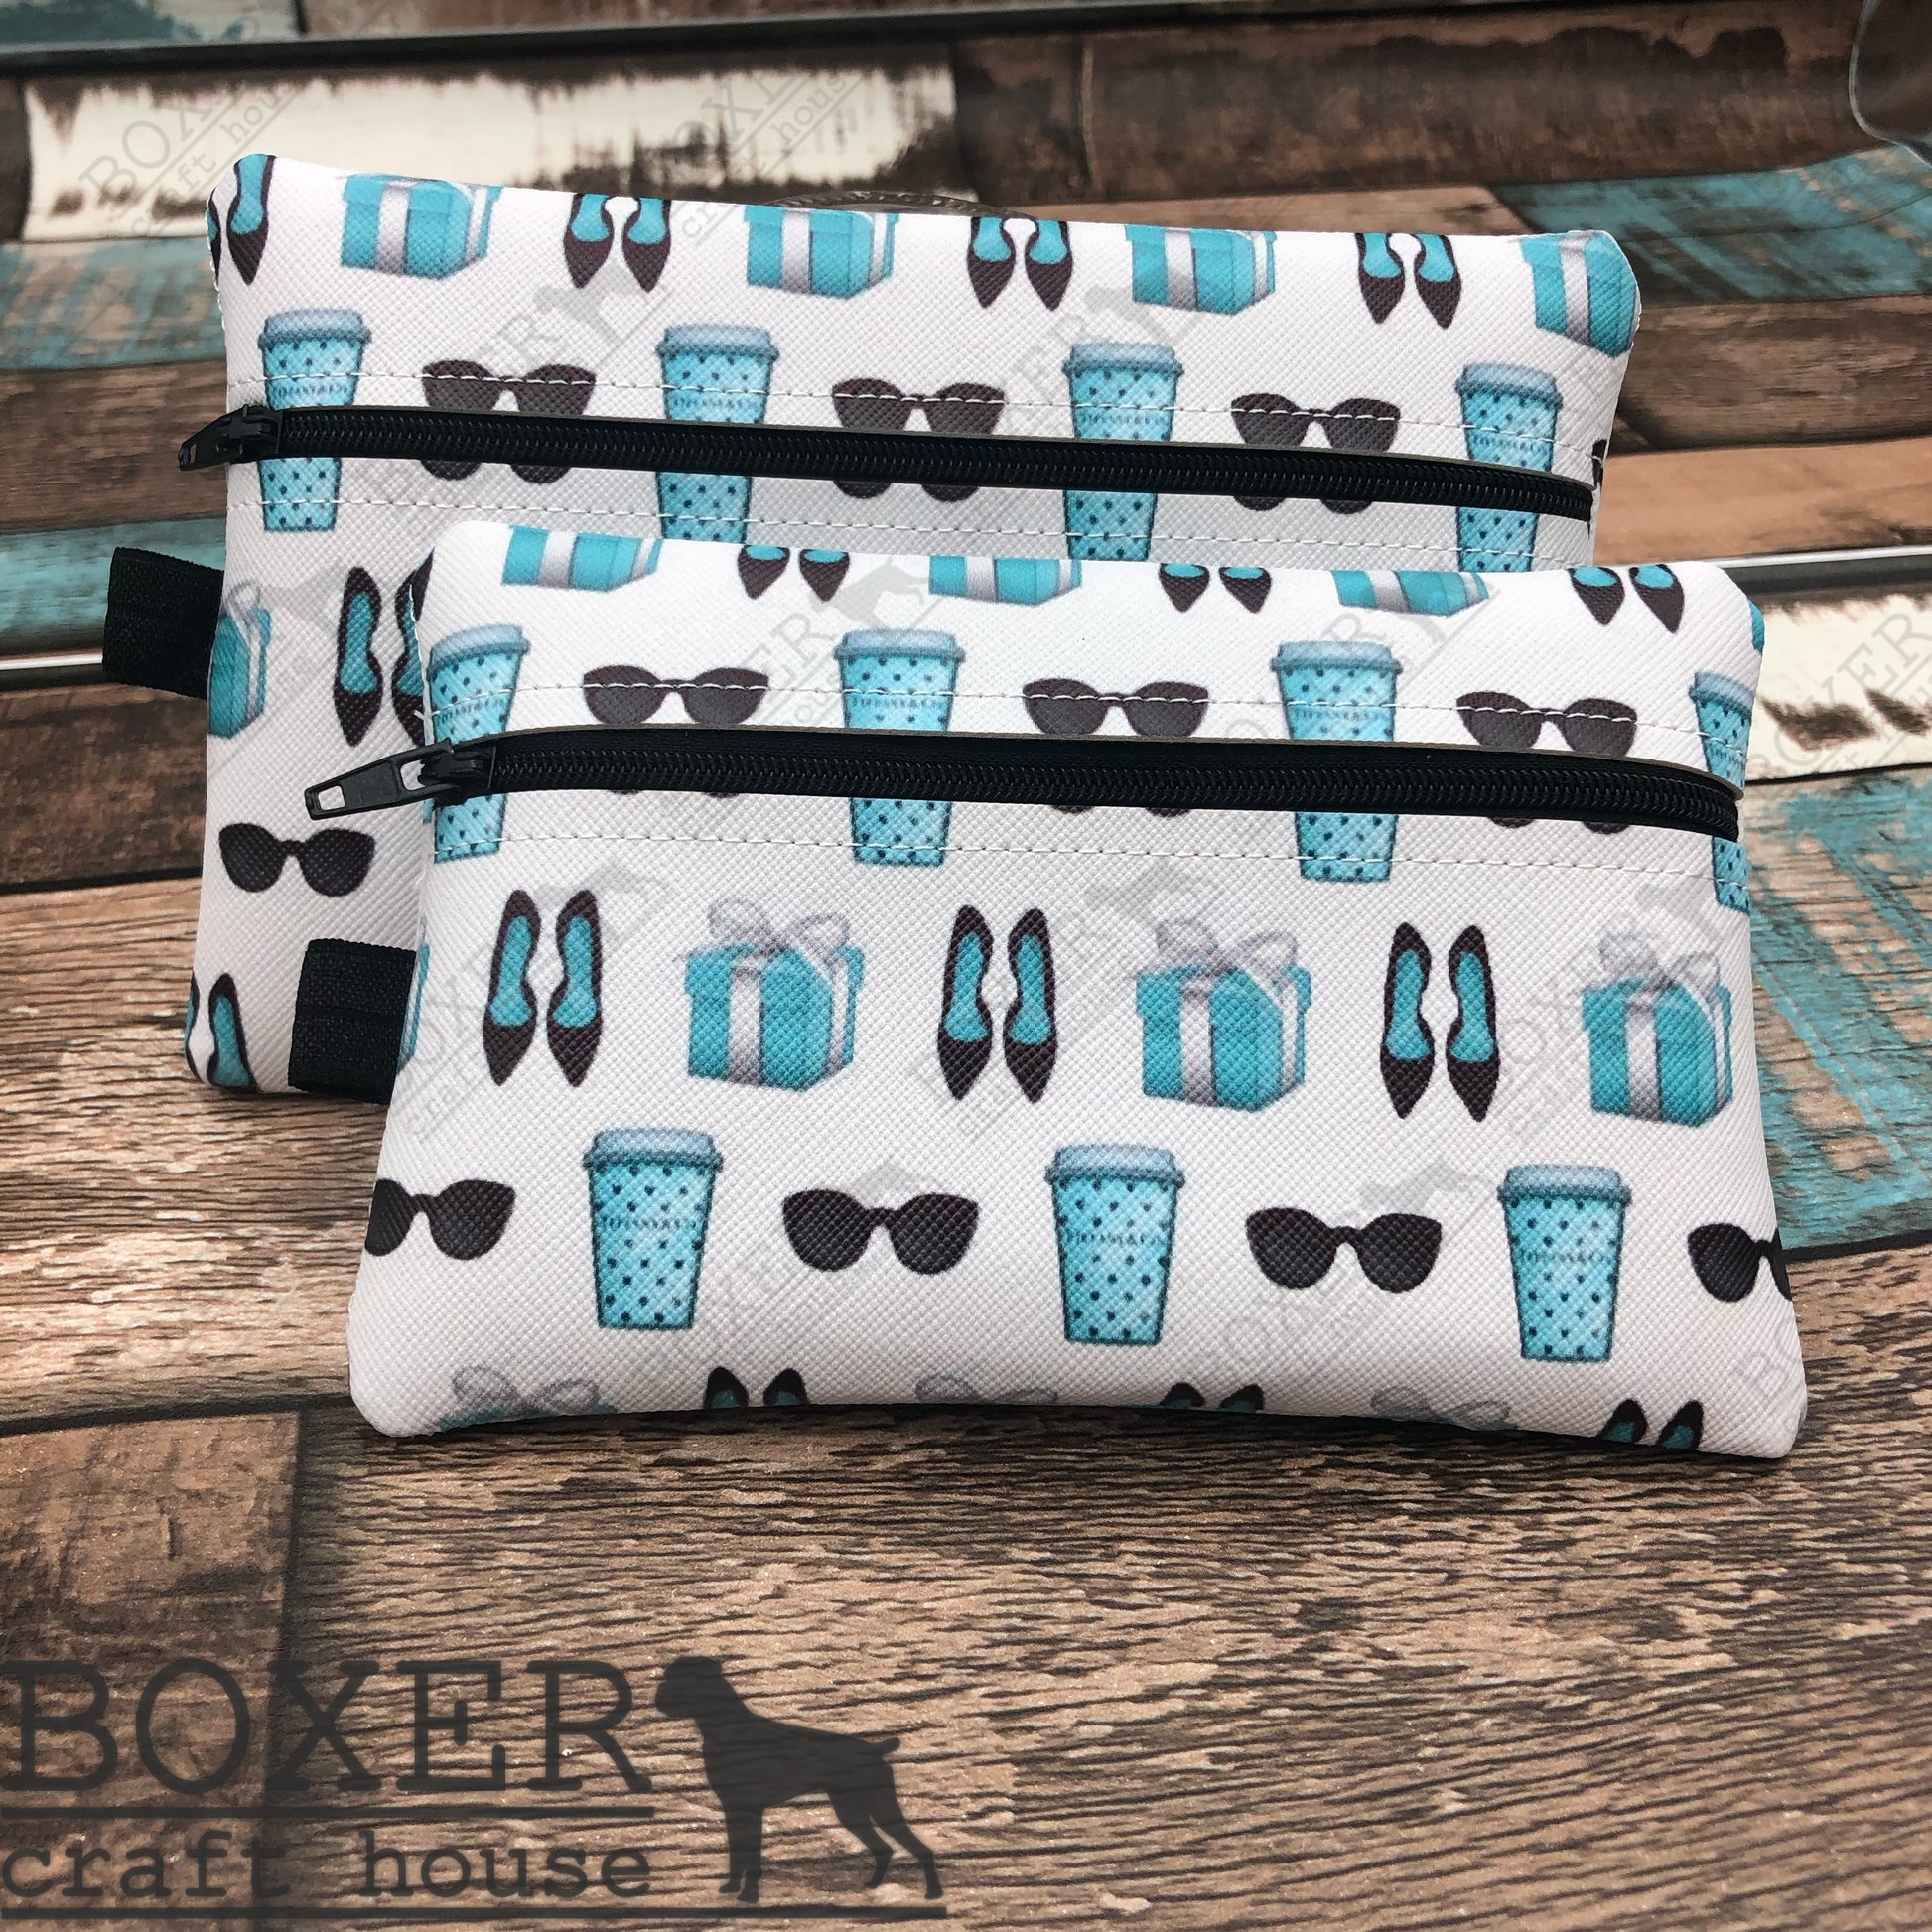 Zippered Bags with a Twist- One Way Zip Class - The Sewing Loft